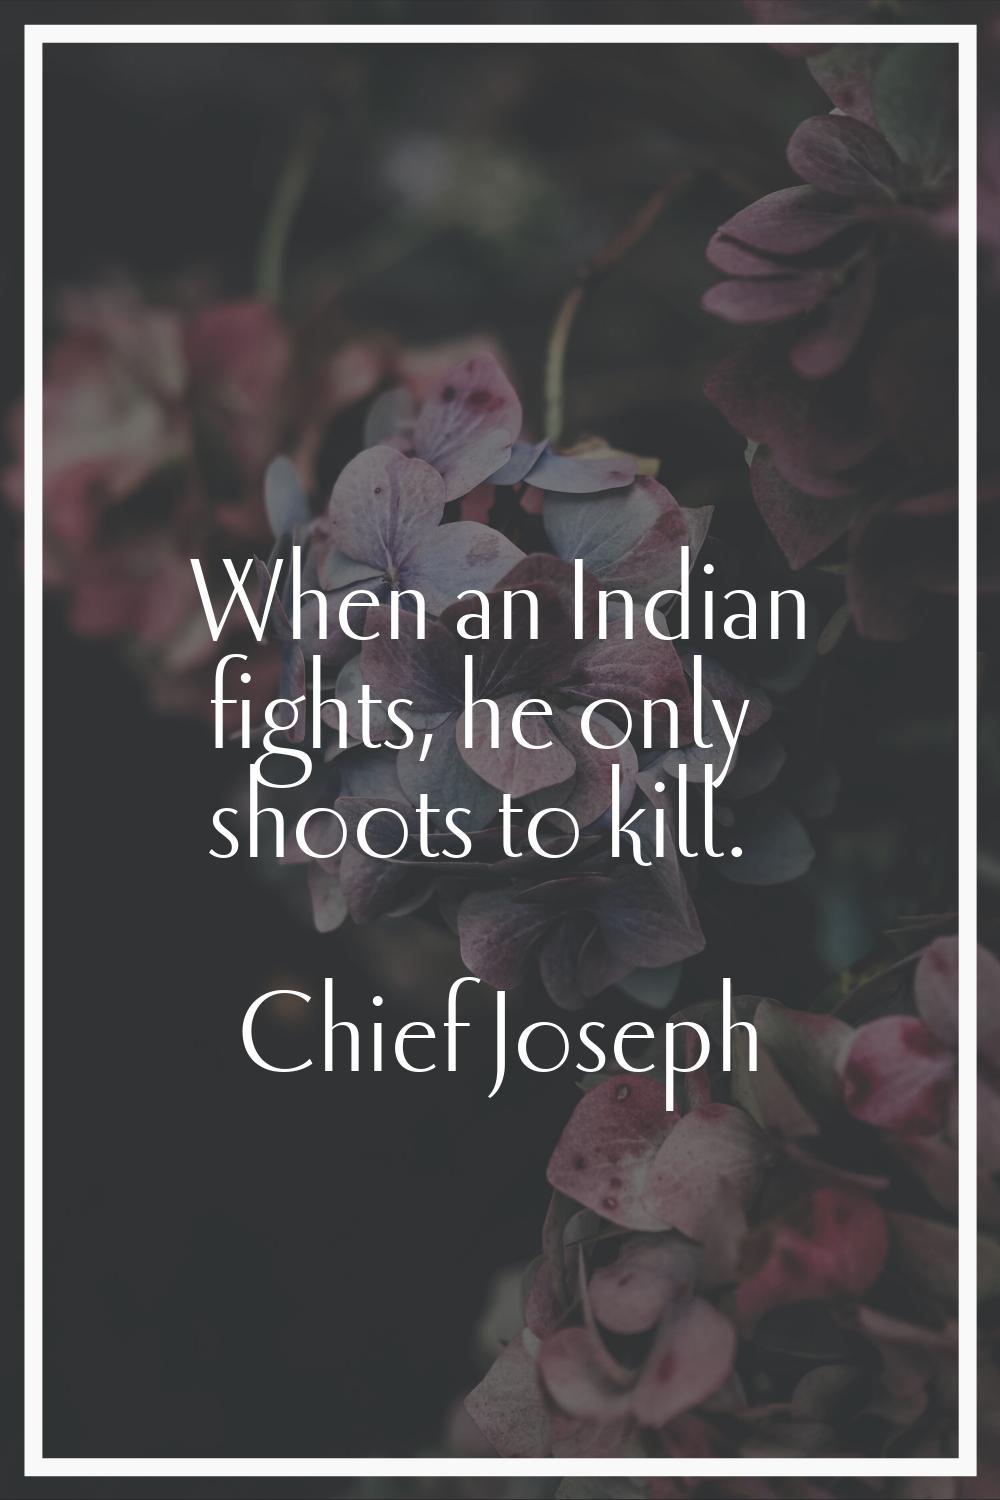 When an Indian fights, he only shoots to kill.